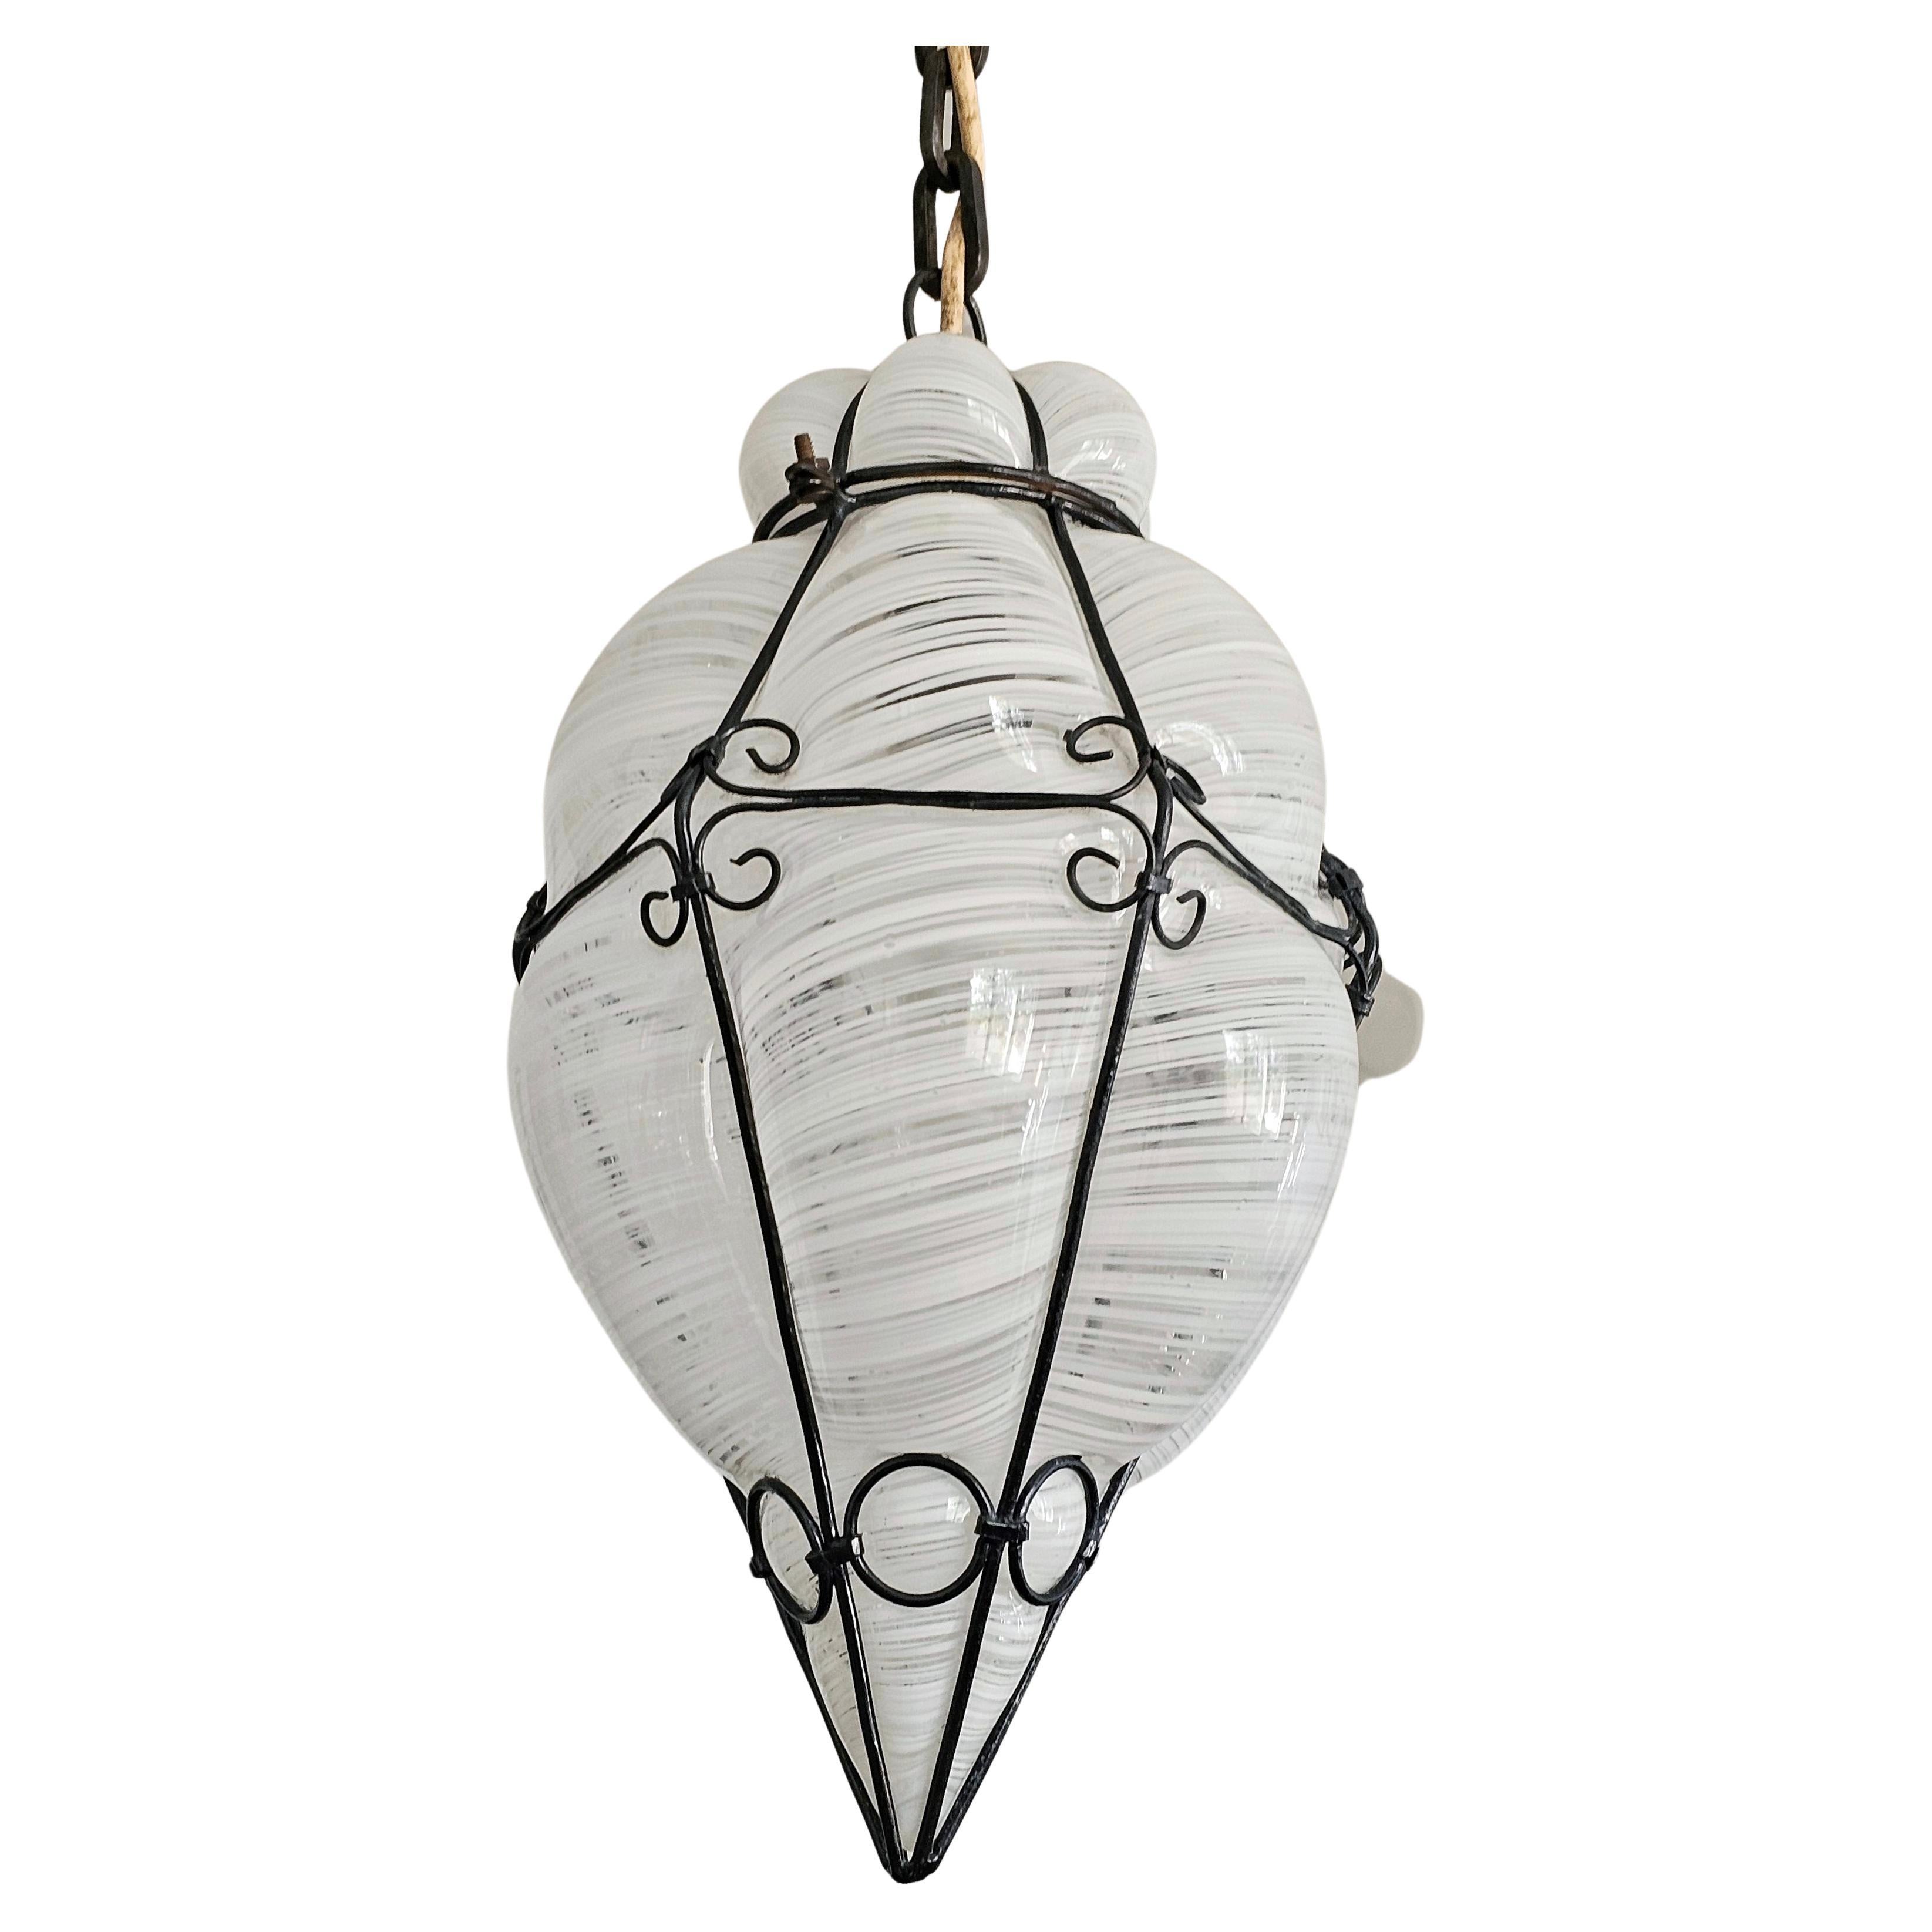 Vintage Mouth-Blown Murano Caged Glass Lantern by Archimede Seguso, Italy 1940s For Sale